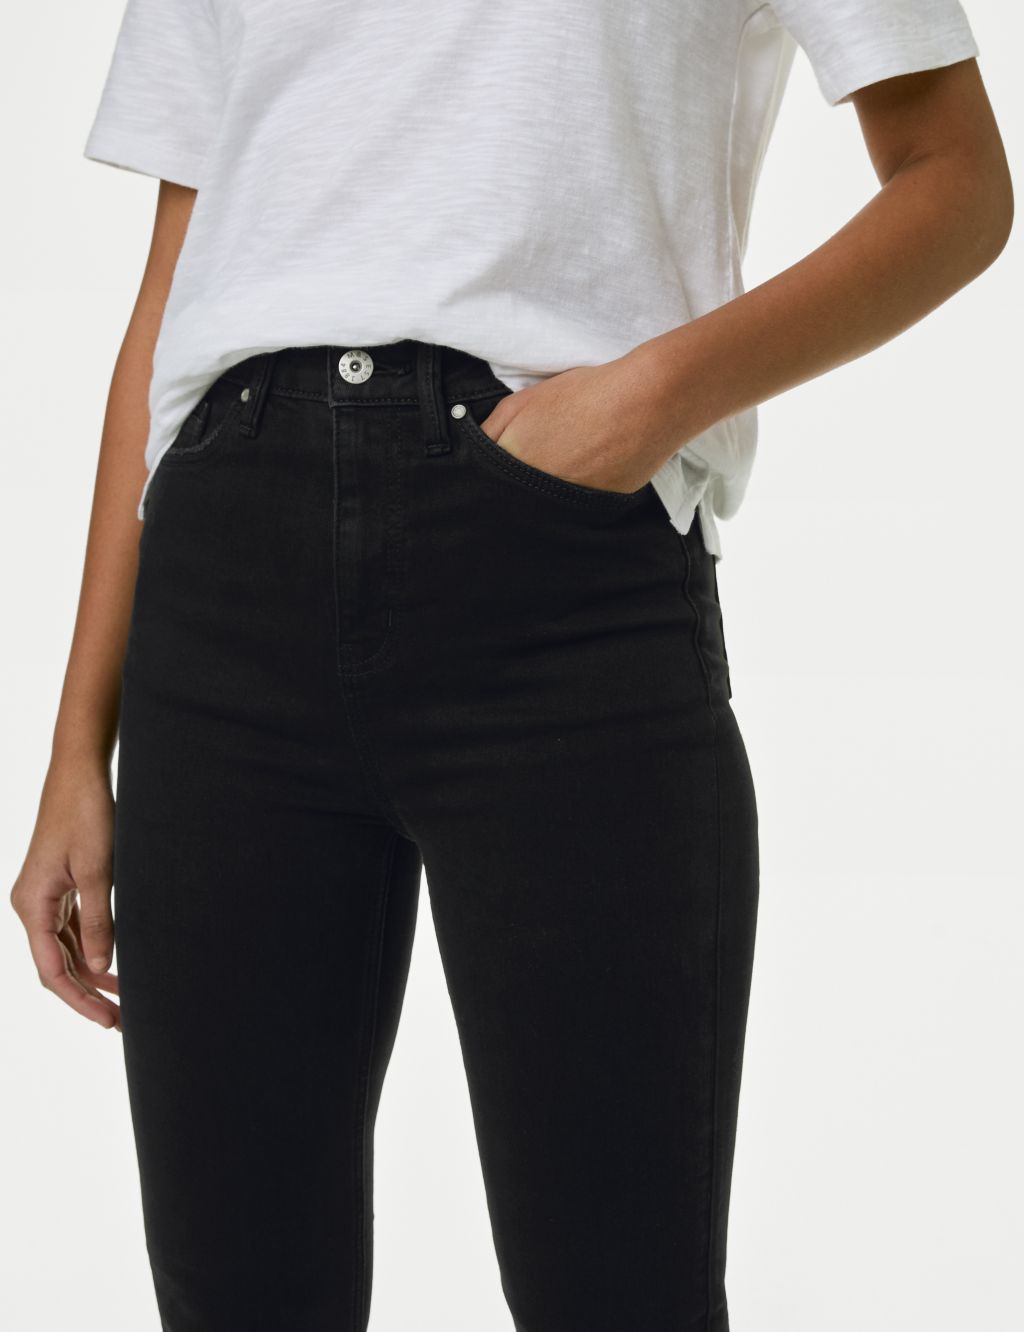 Ivy Supersoft High Waisted Skinny Jeans image 3